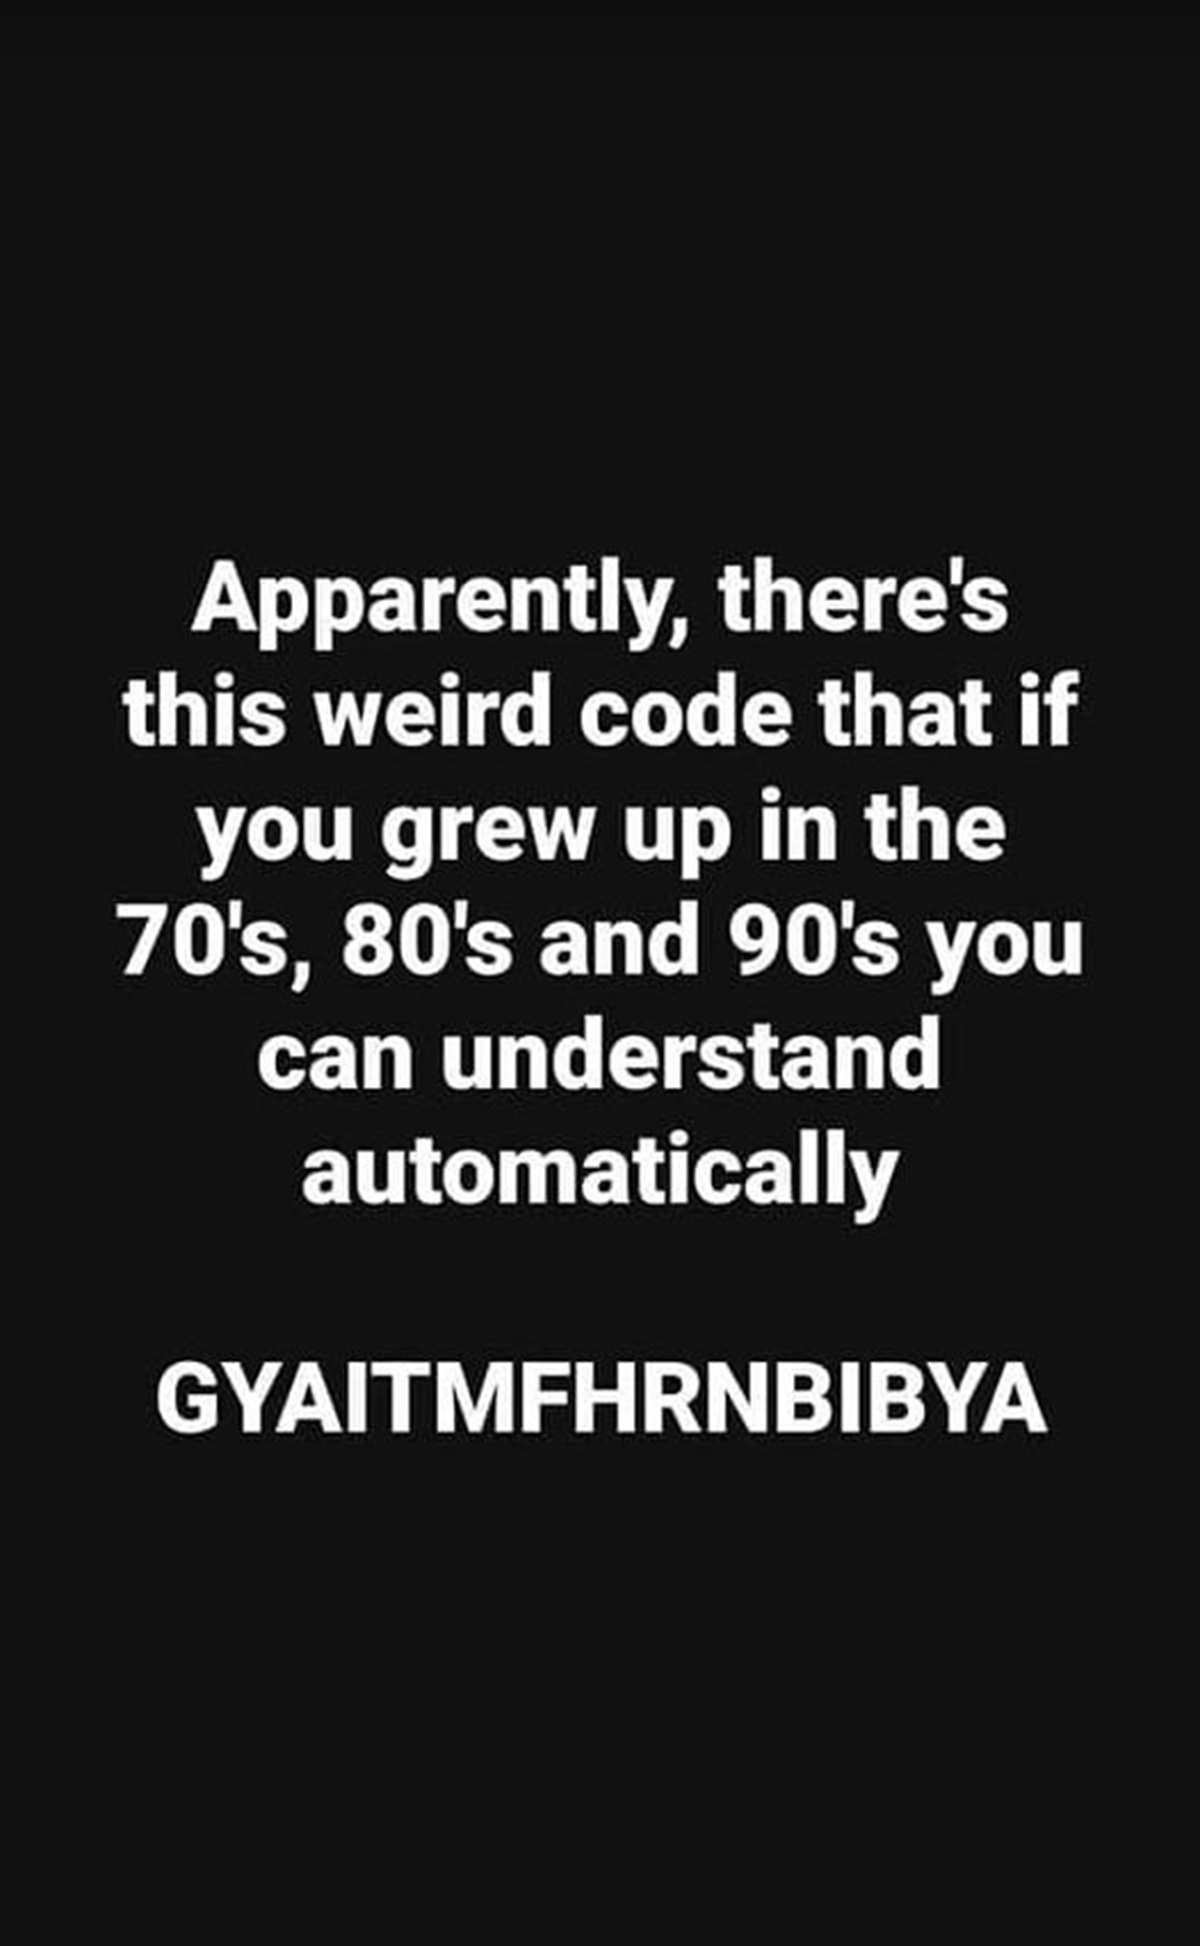 darkness - Apparently, there's this weird code that if you grew up in the 70's, 80's and 90's you can understand automatically Gyaitmfhrnbibya